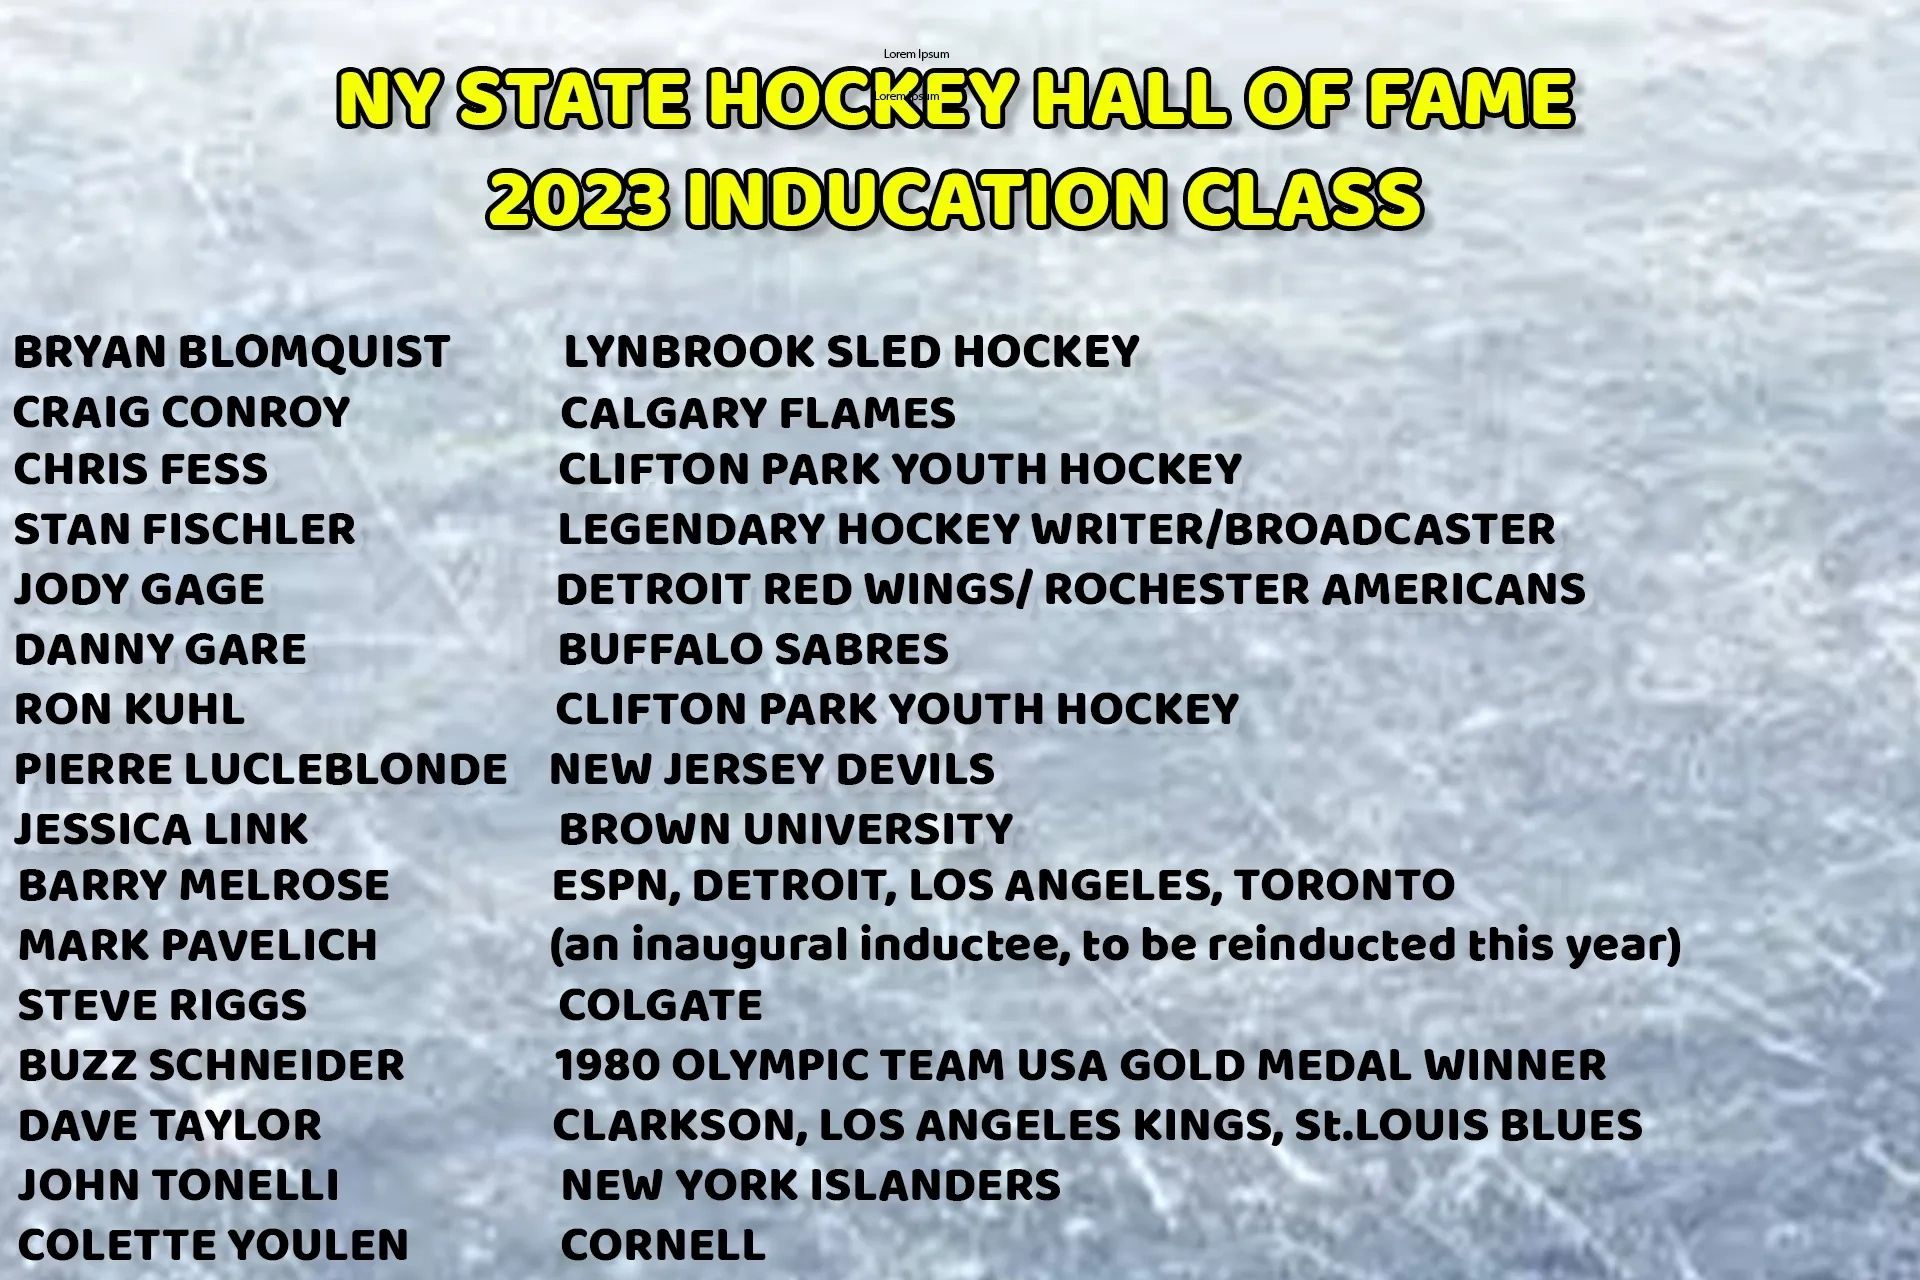 Hockey Hall of Fame - Induction